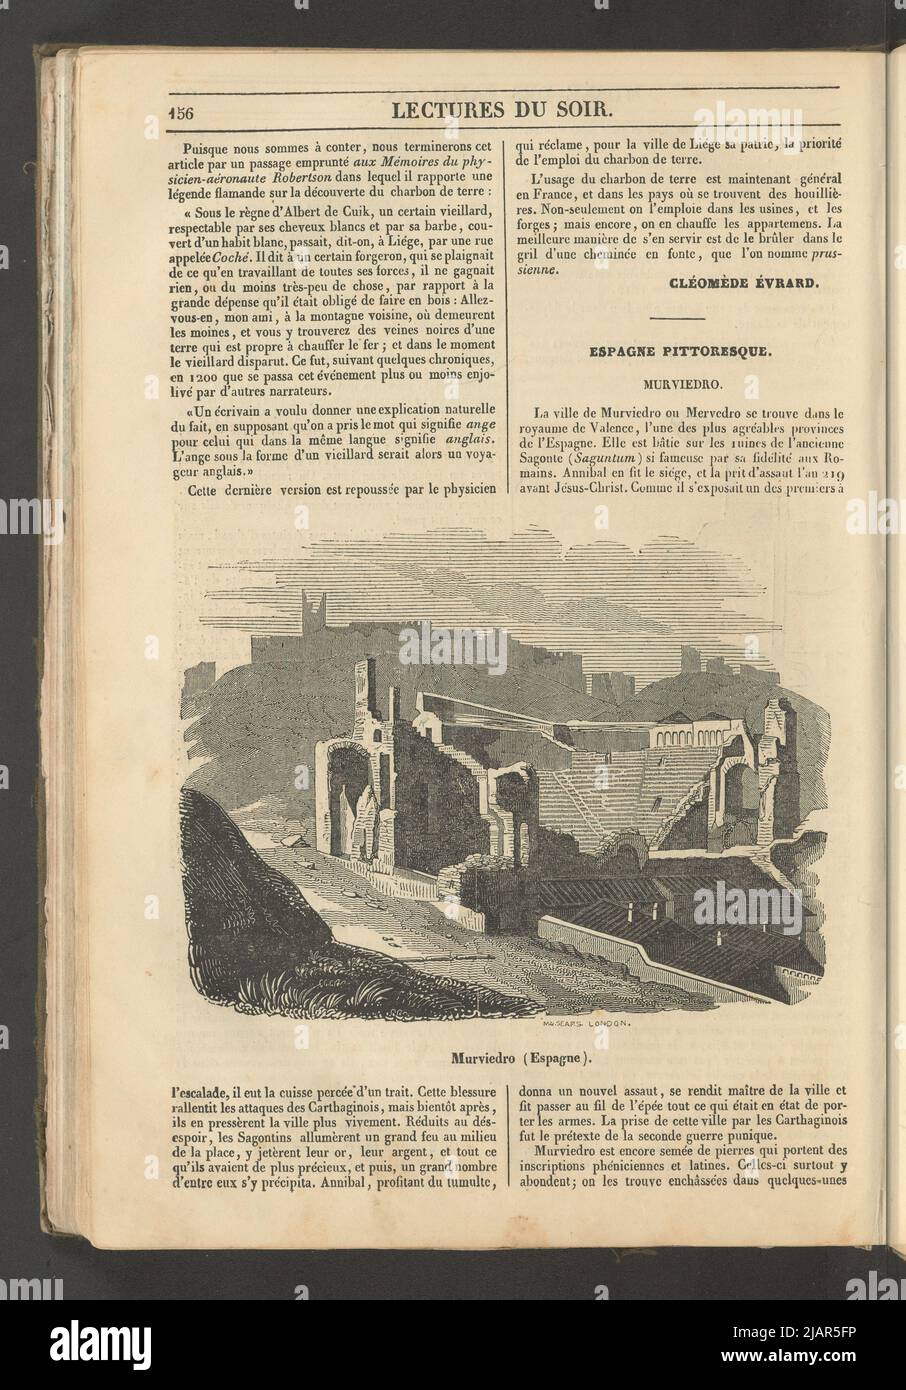 Yearbook 2, notebook 19, May 1834 Cross section of the Coal Mine in Monzil, Illustration for the article Les Mines de Houille; Murvedro, illustration for picturesque Spain in: families museum, evening reading. T. 1. (Year 1 and 2) Paris, [1833 1834]. unknown, Sears, M.U. (fl. ca 1800) Stock Photo